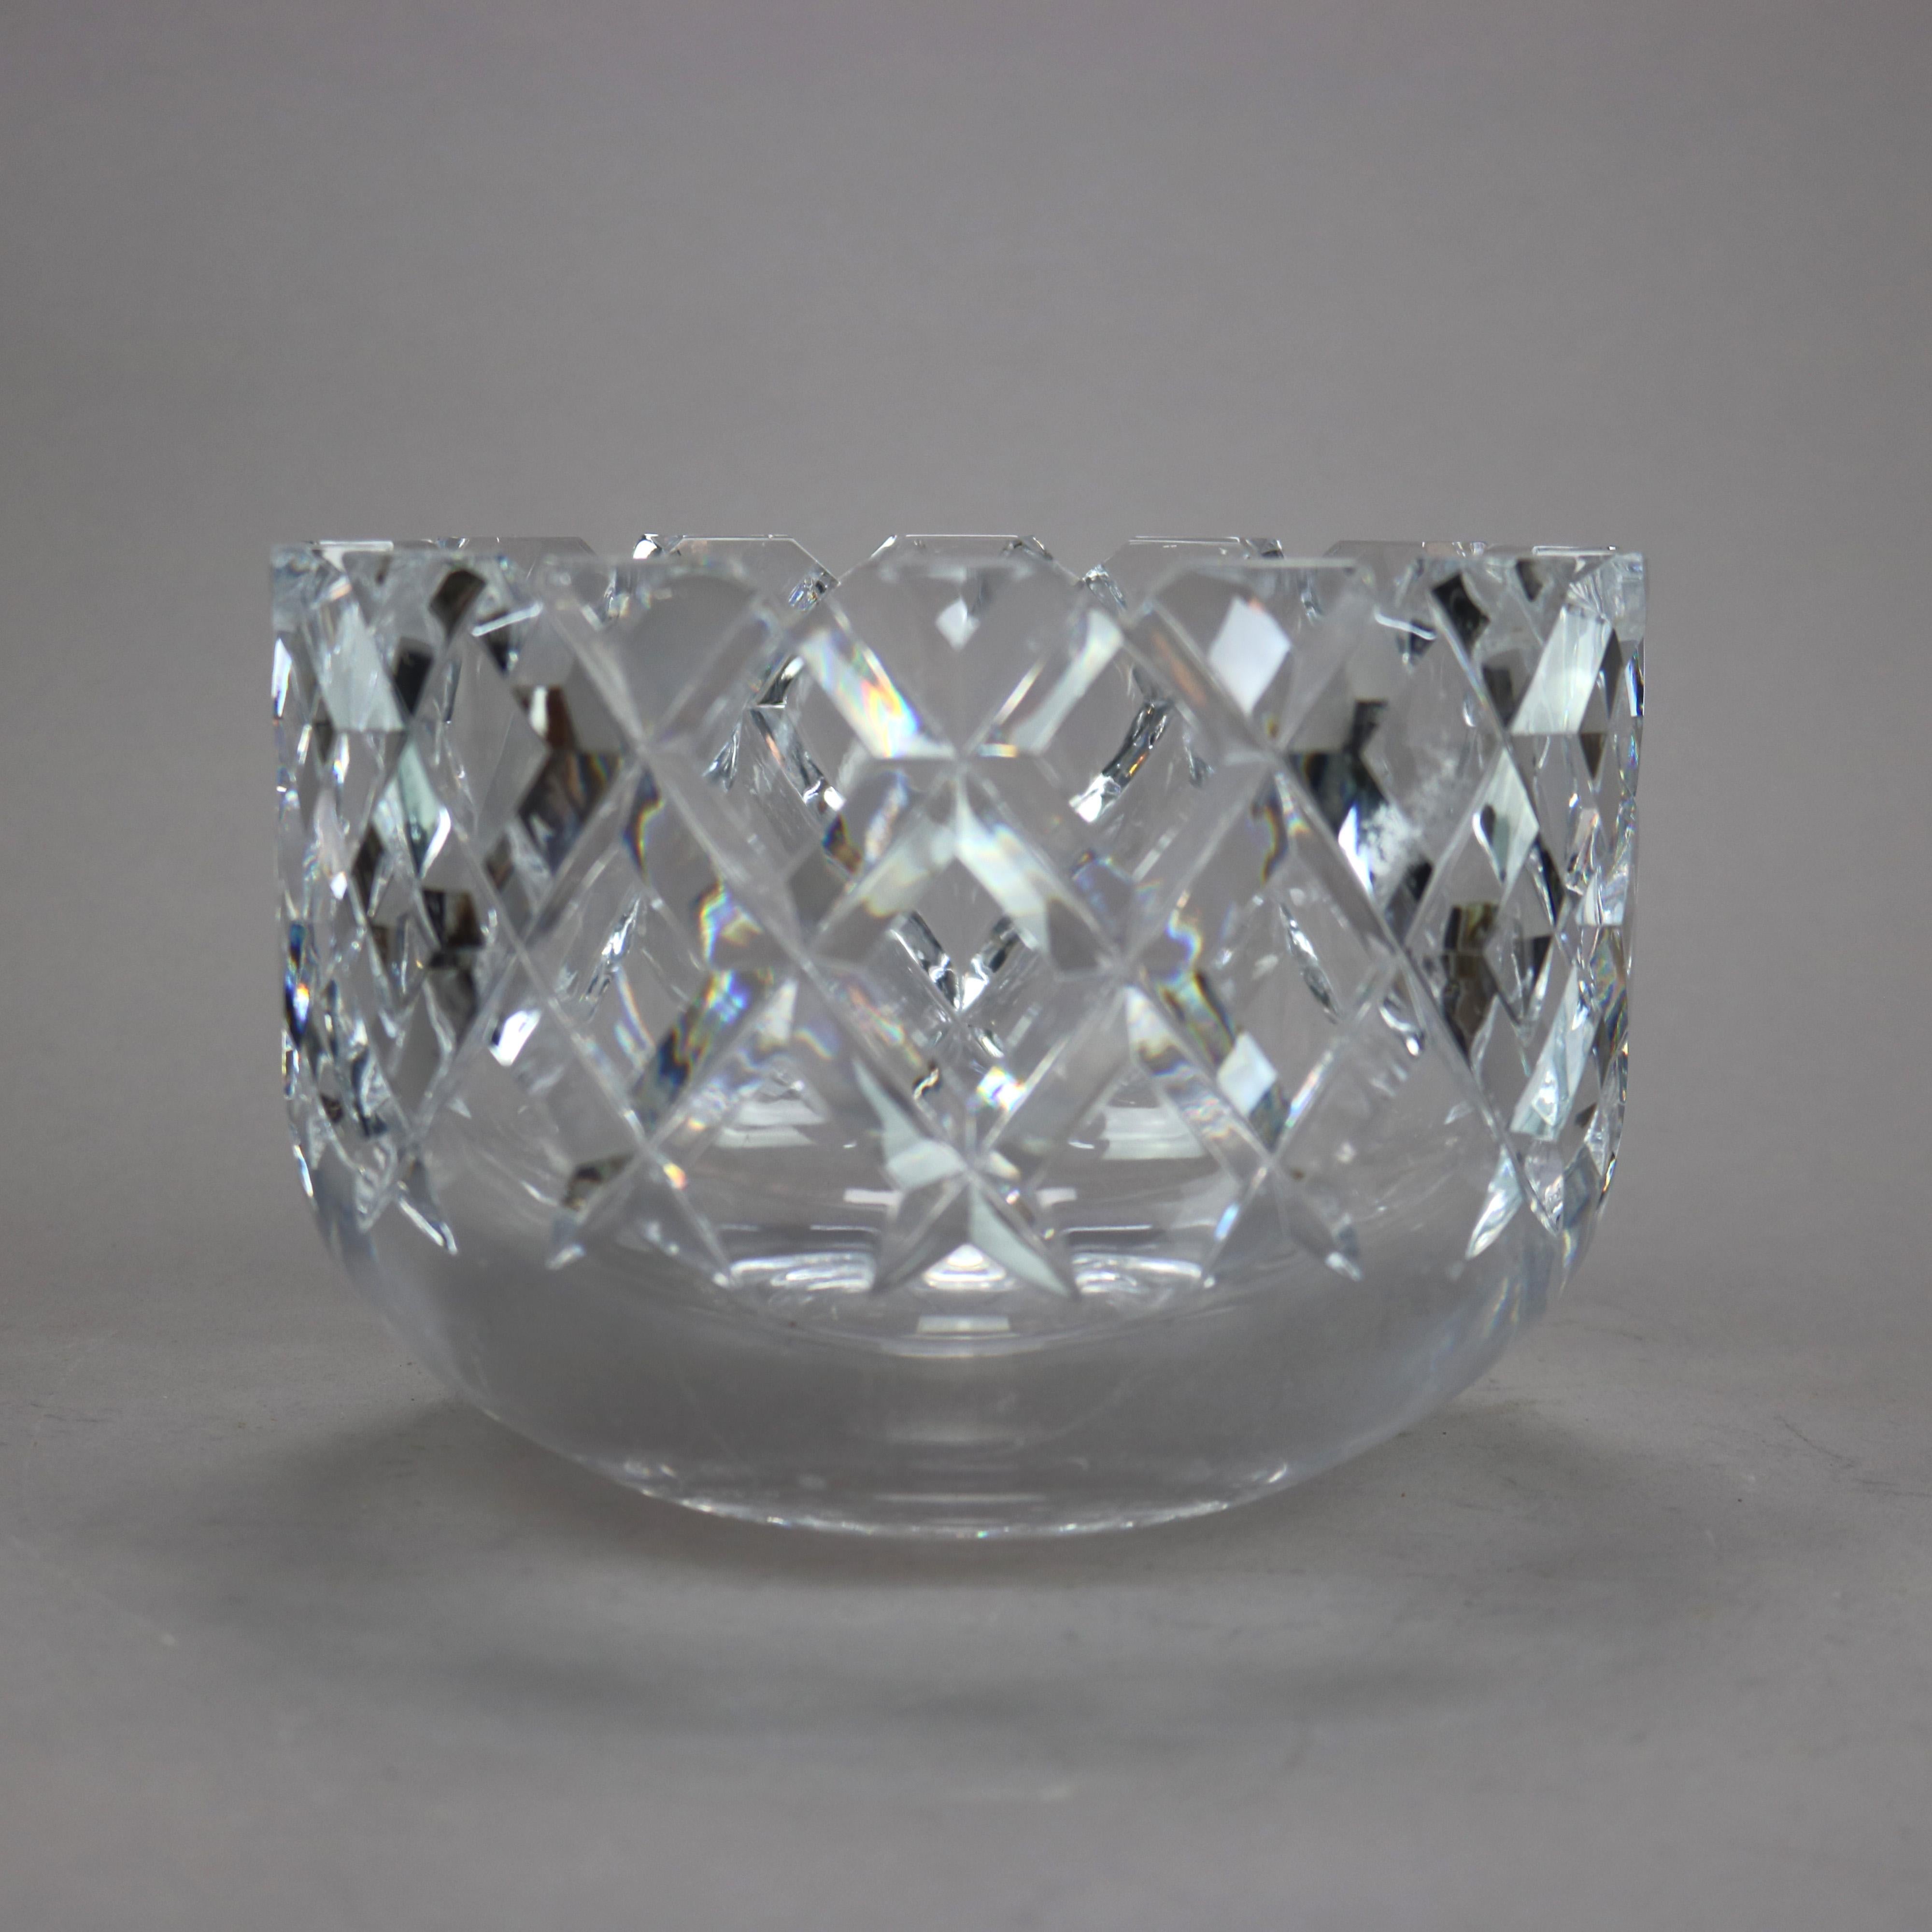 Orrefors Sofiero Cut Lead Crystal Fruit Bowl 20th C In Good Condition For Sale In Big Flats, NY